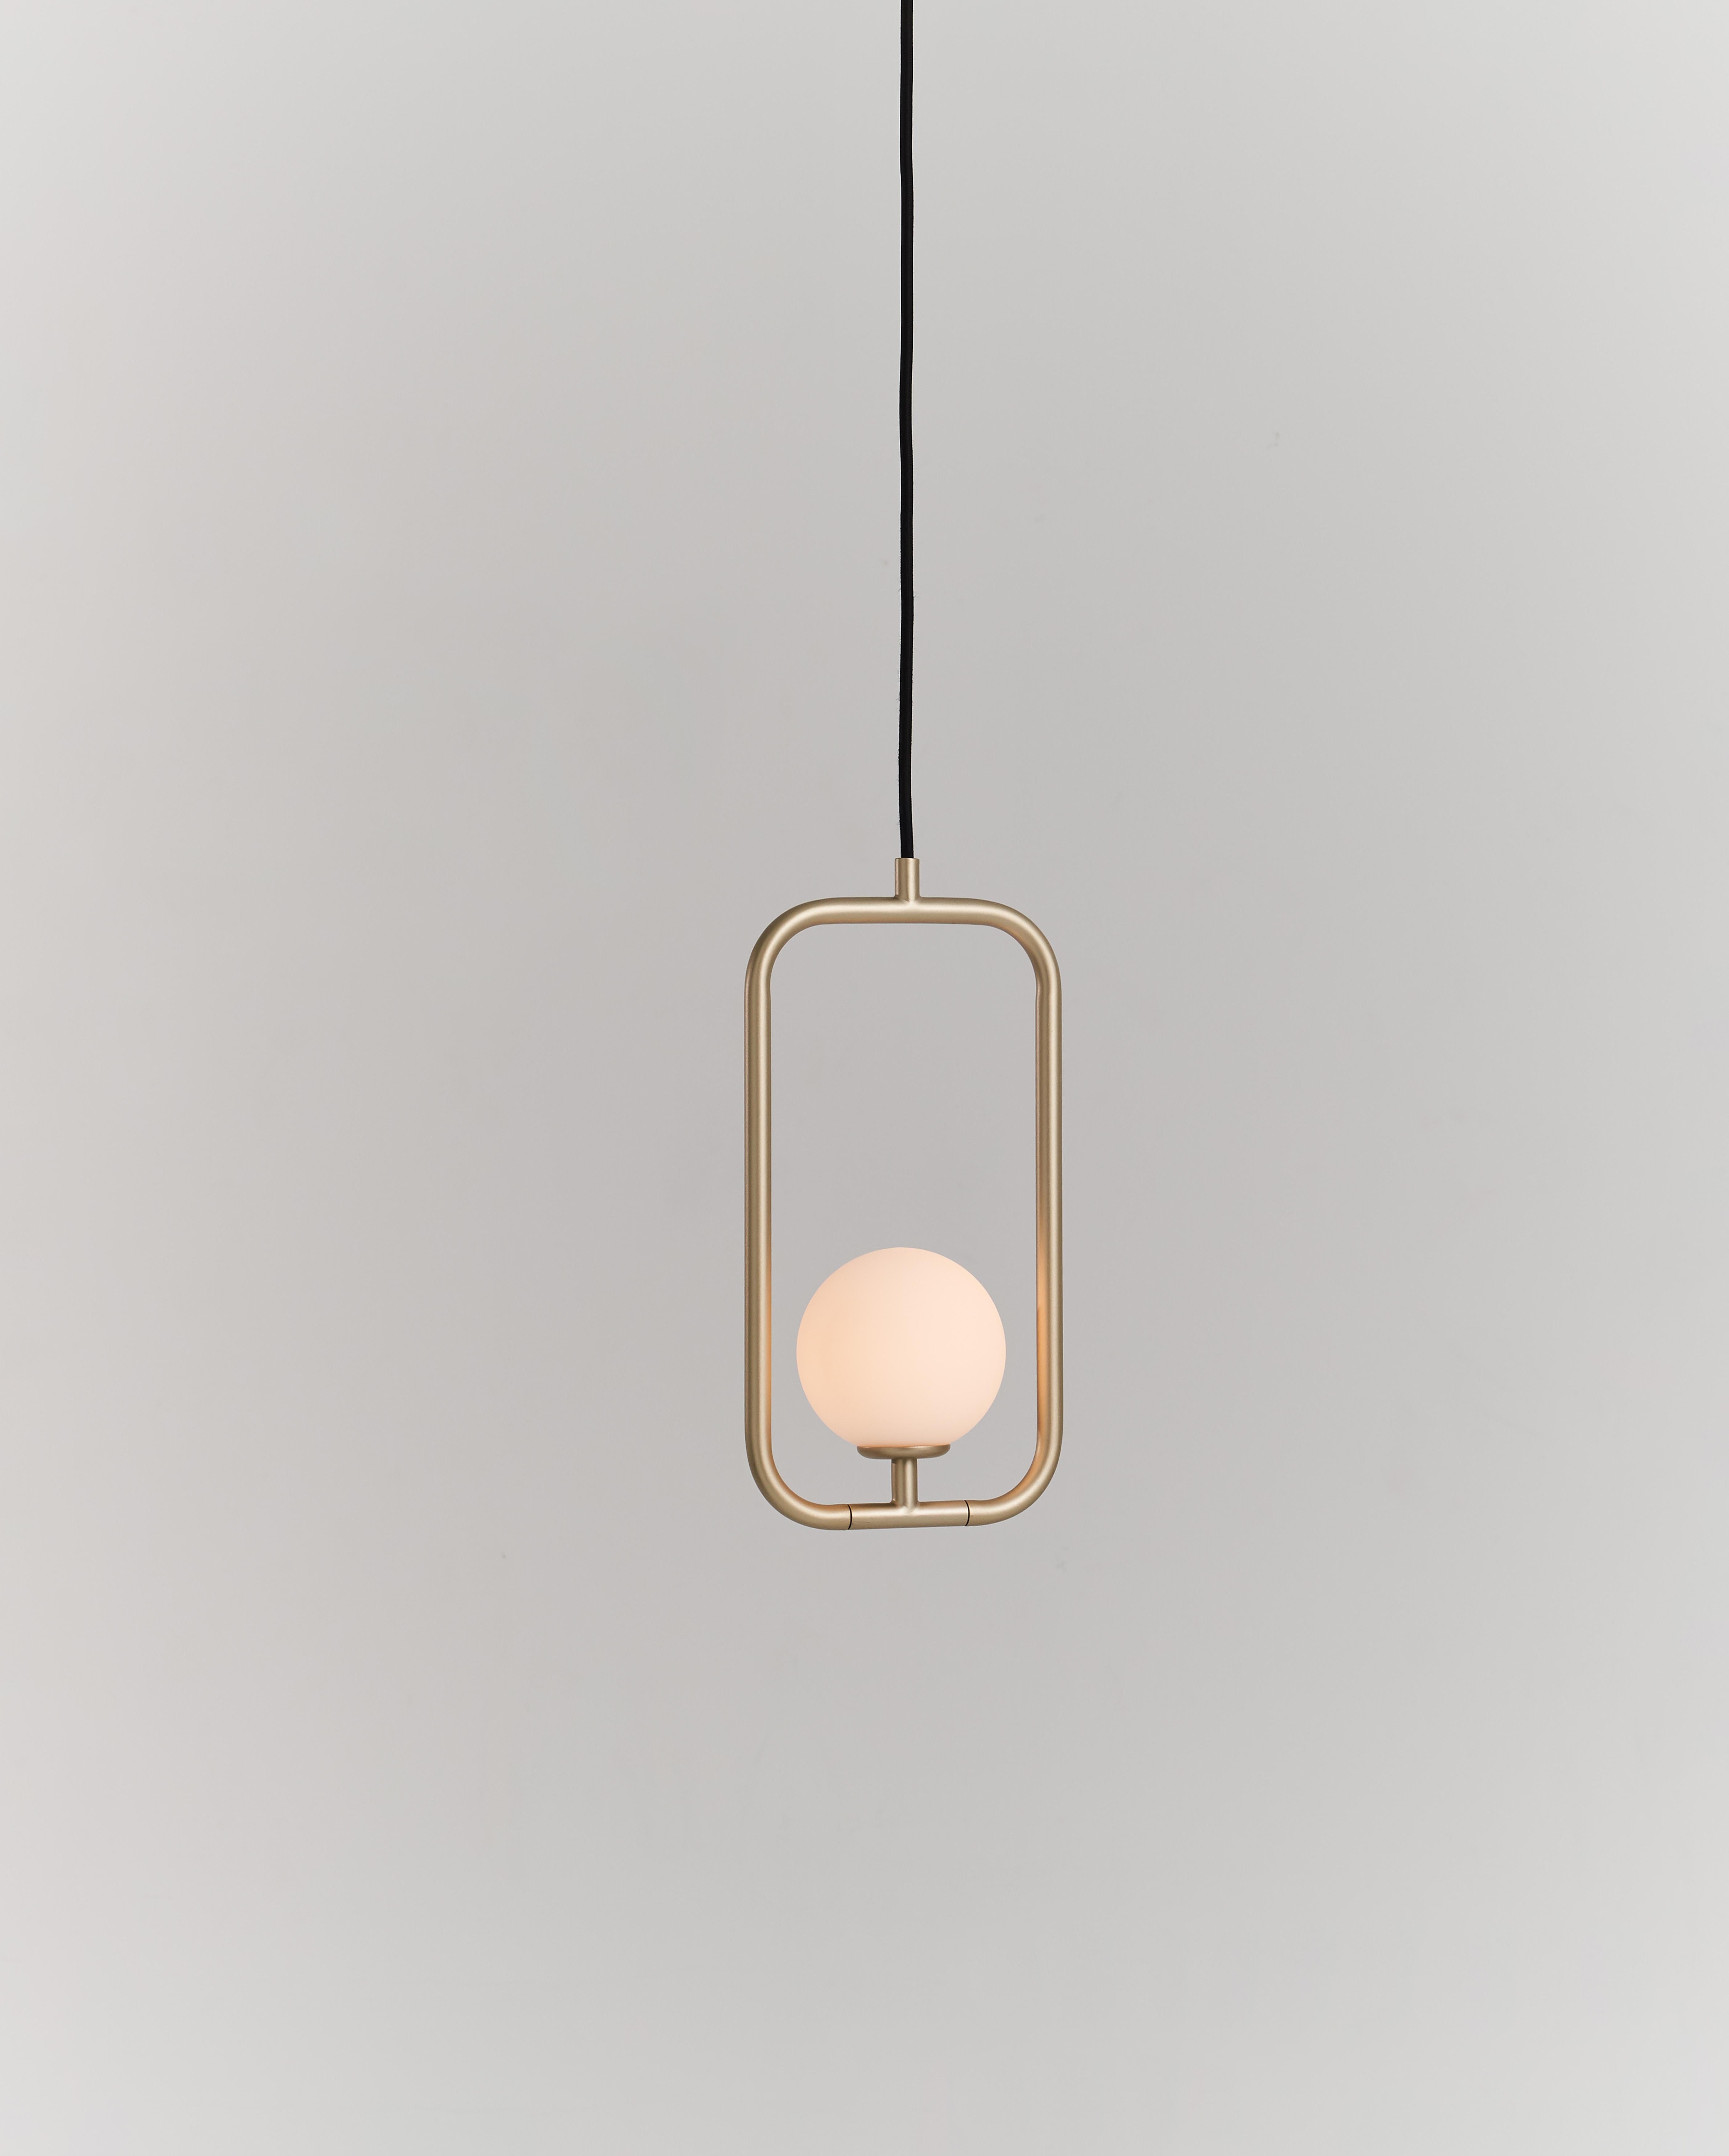 Sircle Pendant S, a symbolization merged Square and Circle, inspired by the East aesthetic philosophy, the circular light ball just like a soft tender mind leans on the rigid prudent frame, chemically shaped a harmonious feature with its flexible